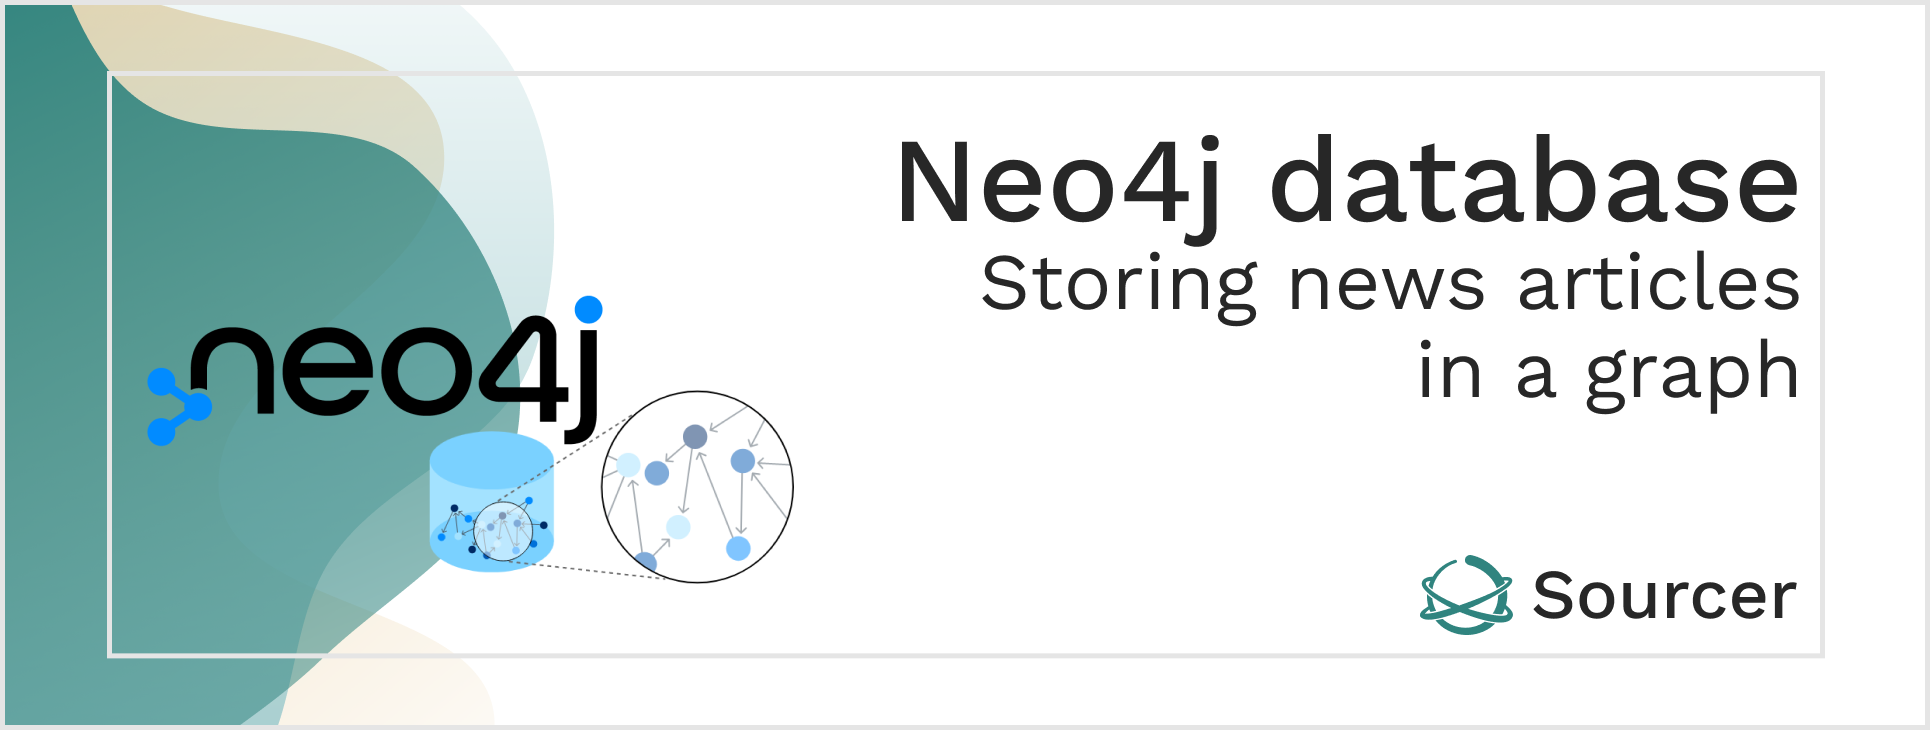 Neo4j database; Storing news articles in a graph-image